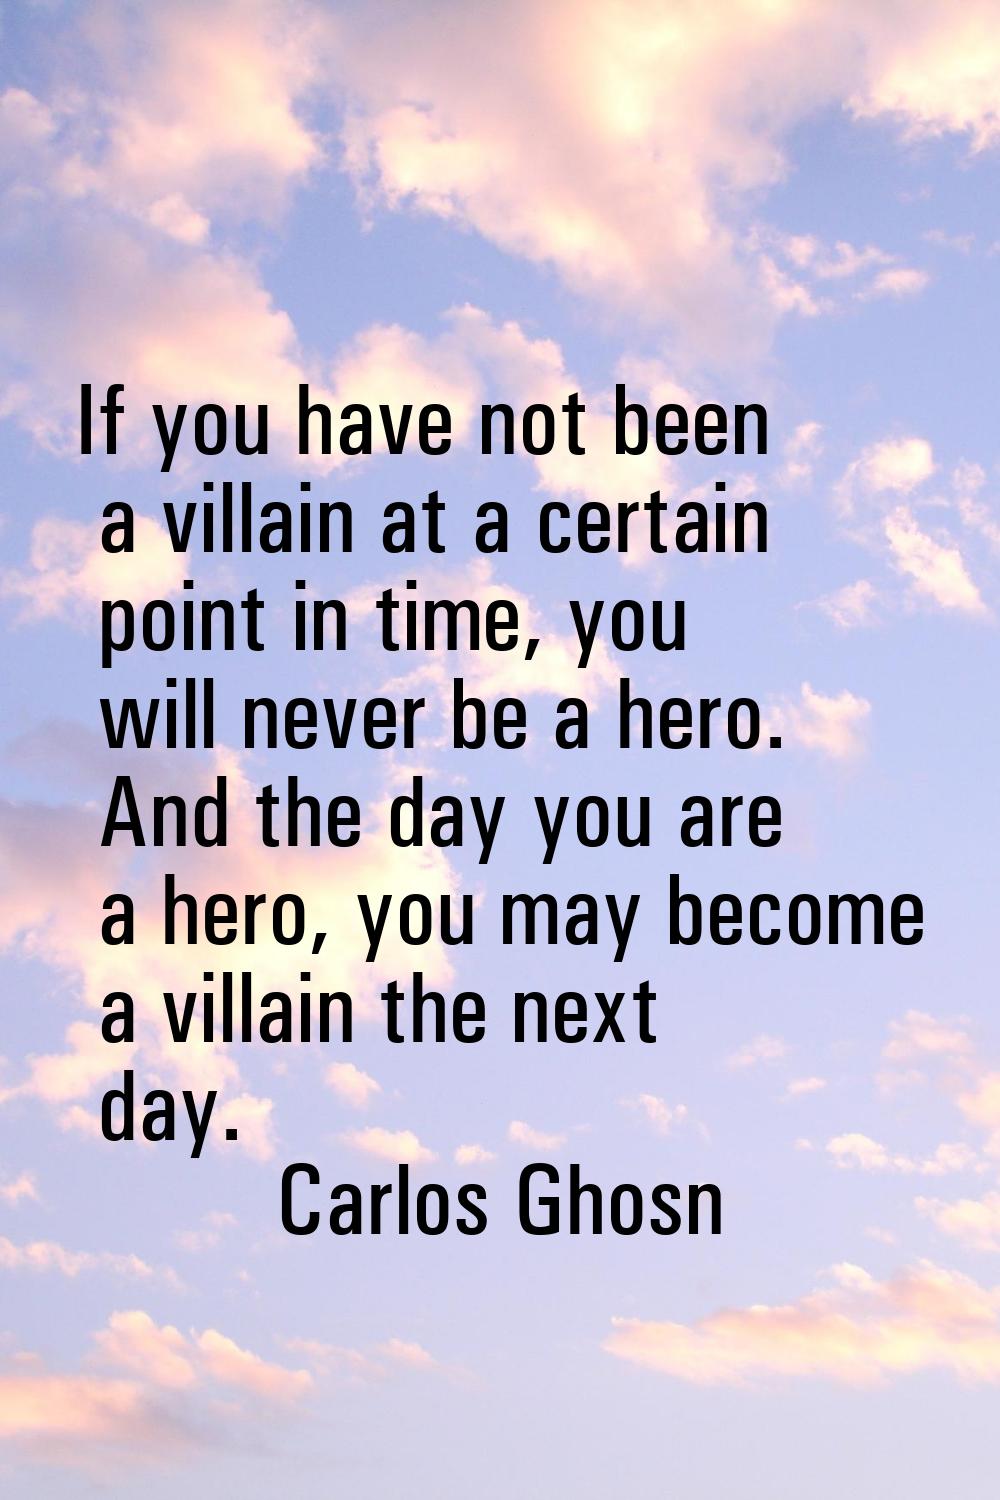 If you have not been a villain at a certain point in time, you will never be a hero. And the day yo